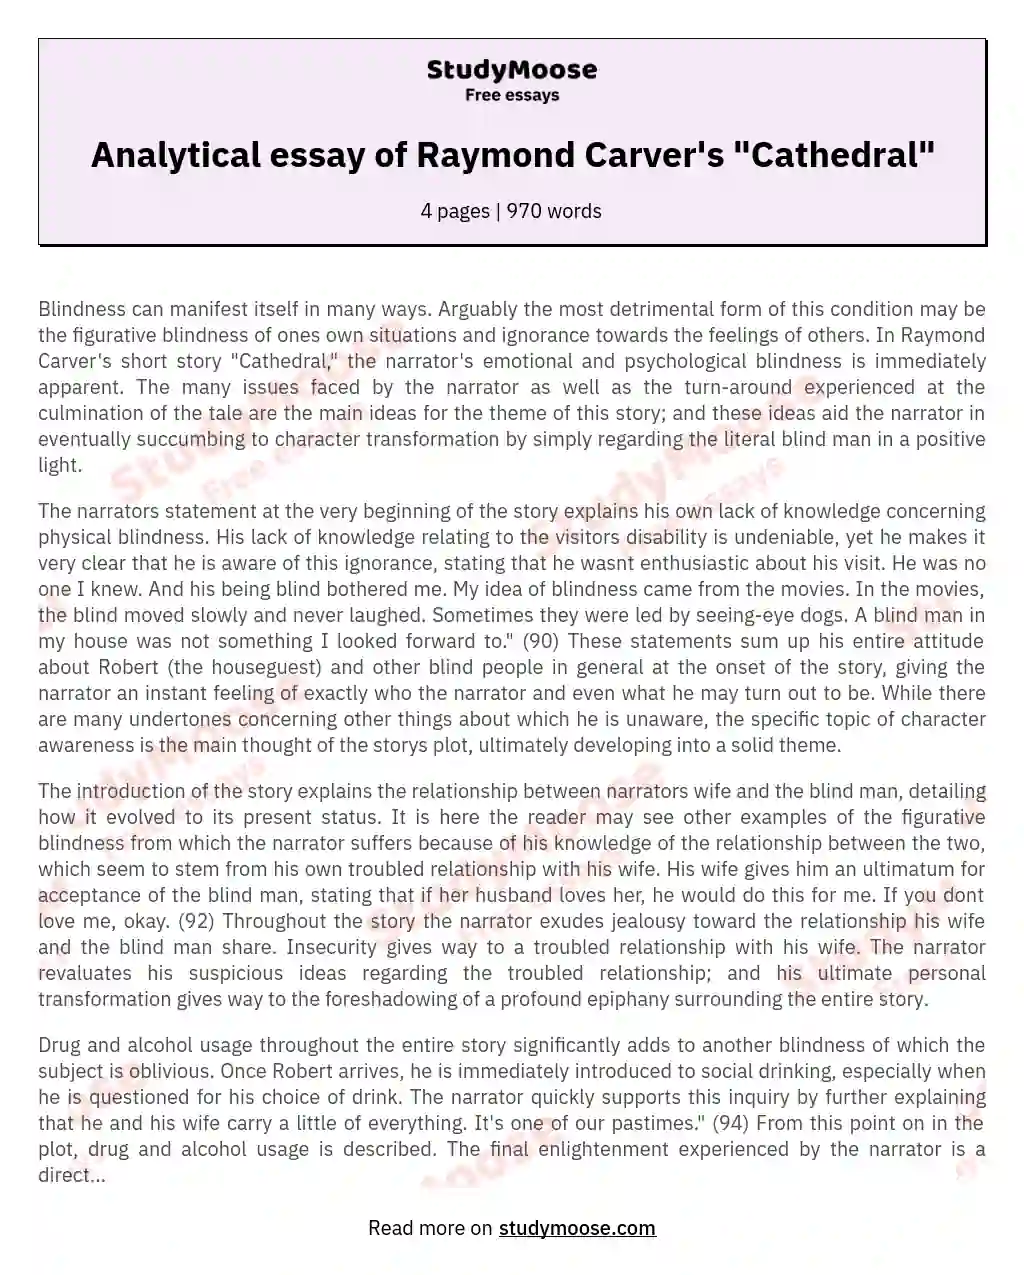 Analytical essay of Raymond Carver's "Cathedral" essay